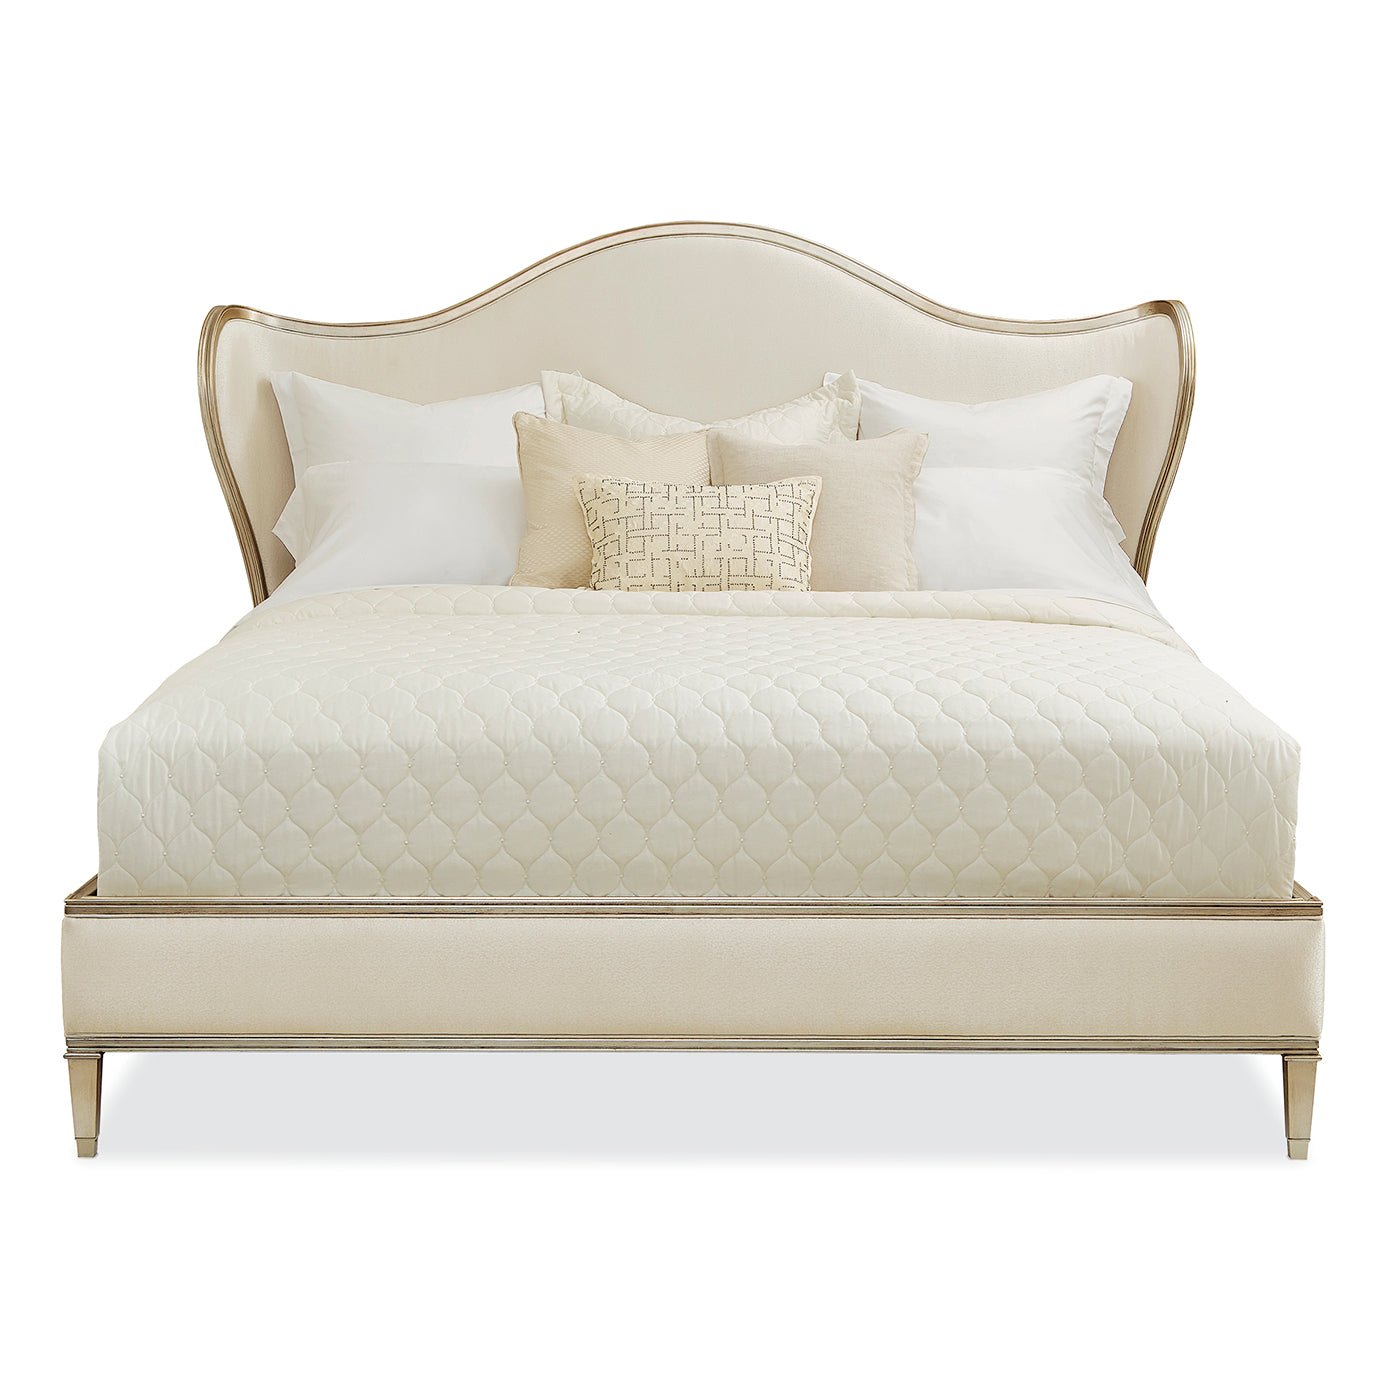 Transitional Style Upholstered King Bed - English Georgian America